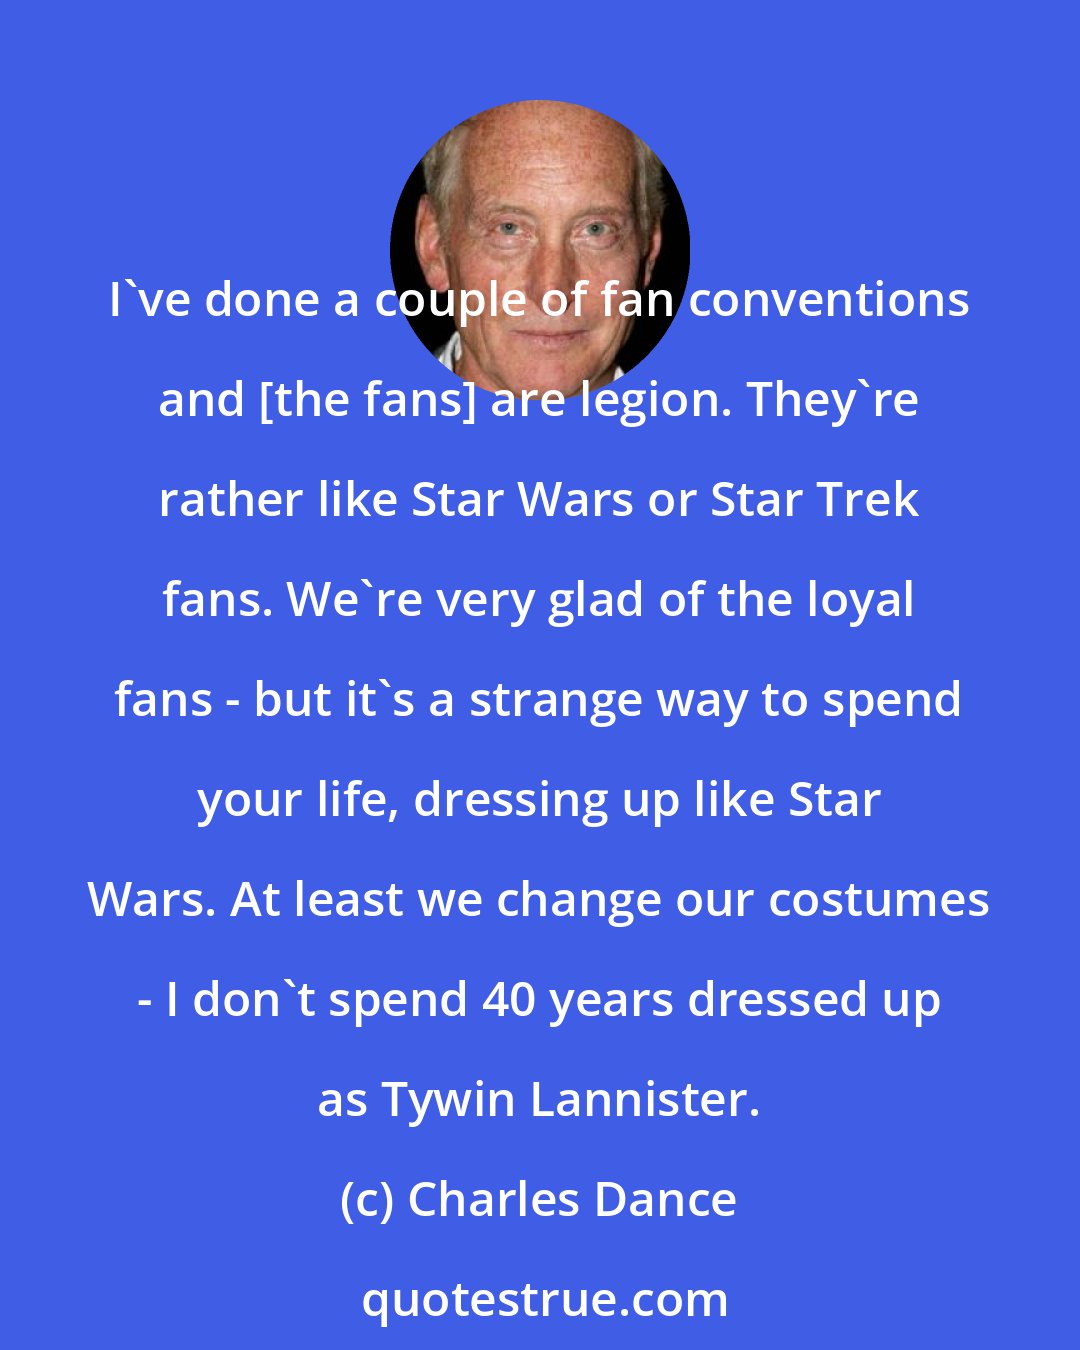 Charles Dance: I've done a couple of fan conventions and [the fans] are legion. They're rather like Star Wars or Star Trek fans. We're very glad of the loyal fans - but it's a strange way to spend your life, dressing up like Star Wars. At least we change our costumes - I don't spend 40 years dressed up as Tywin Lannister.